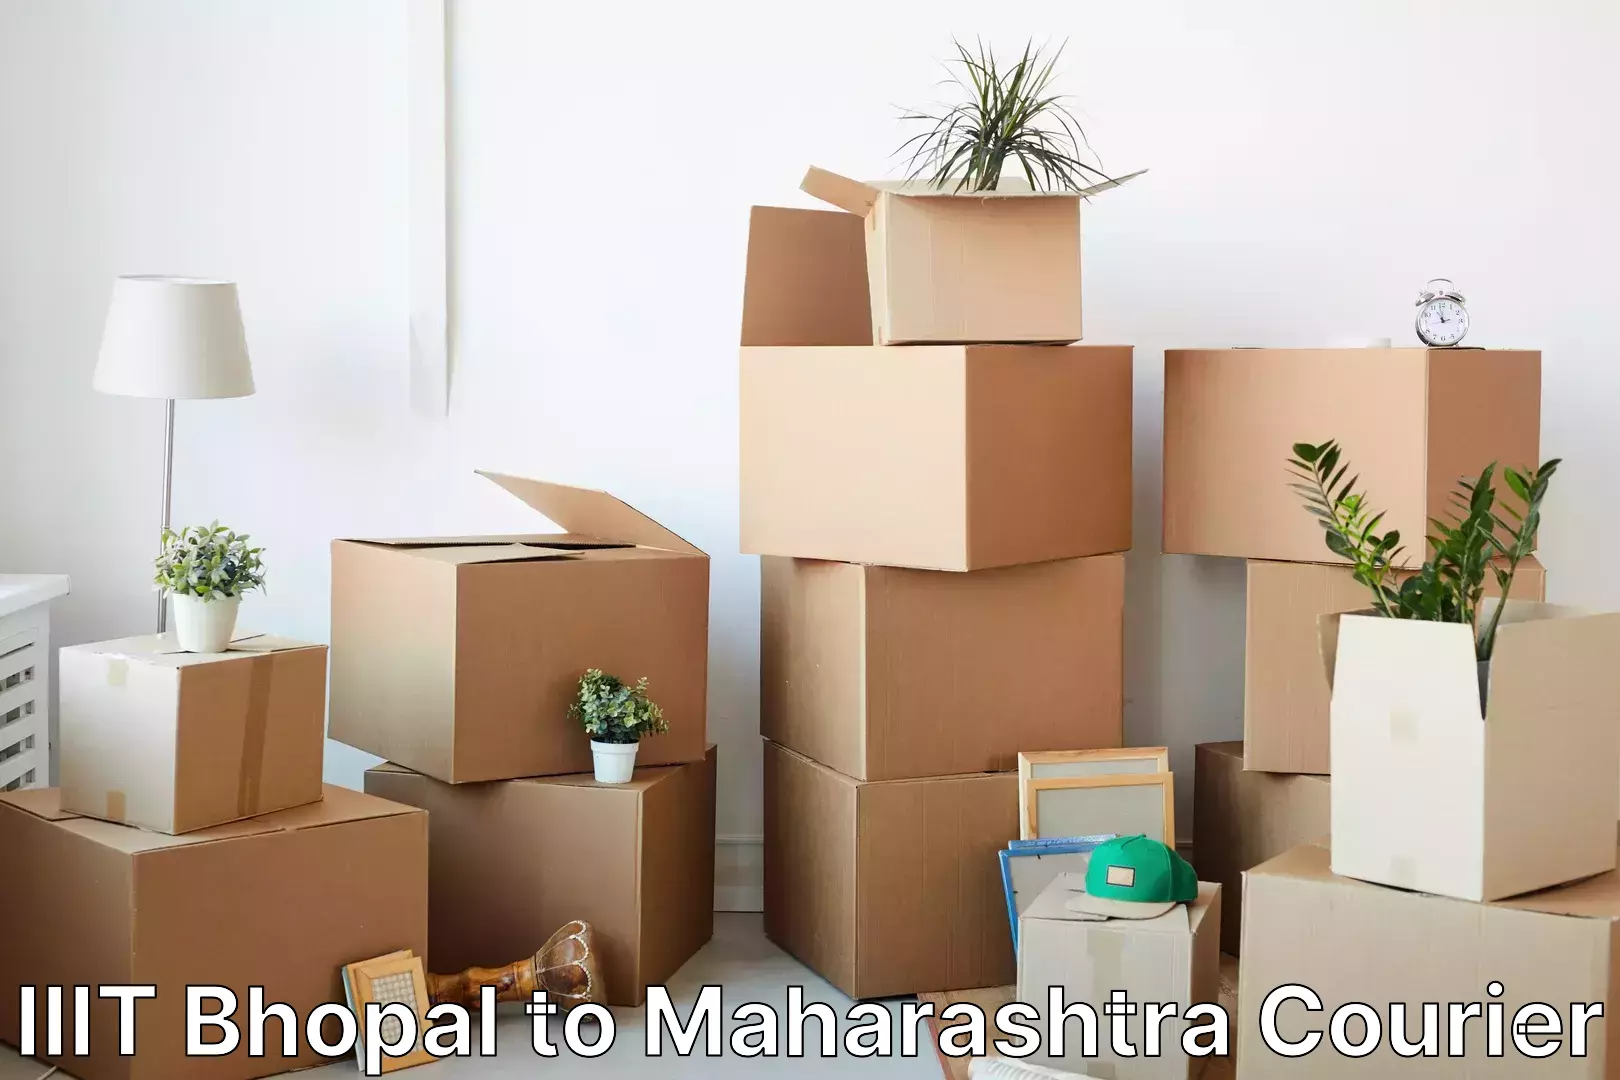 Comprehensive freight services IIIT Bhopal to Maharashtra